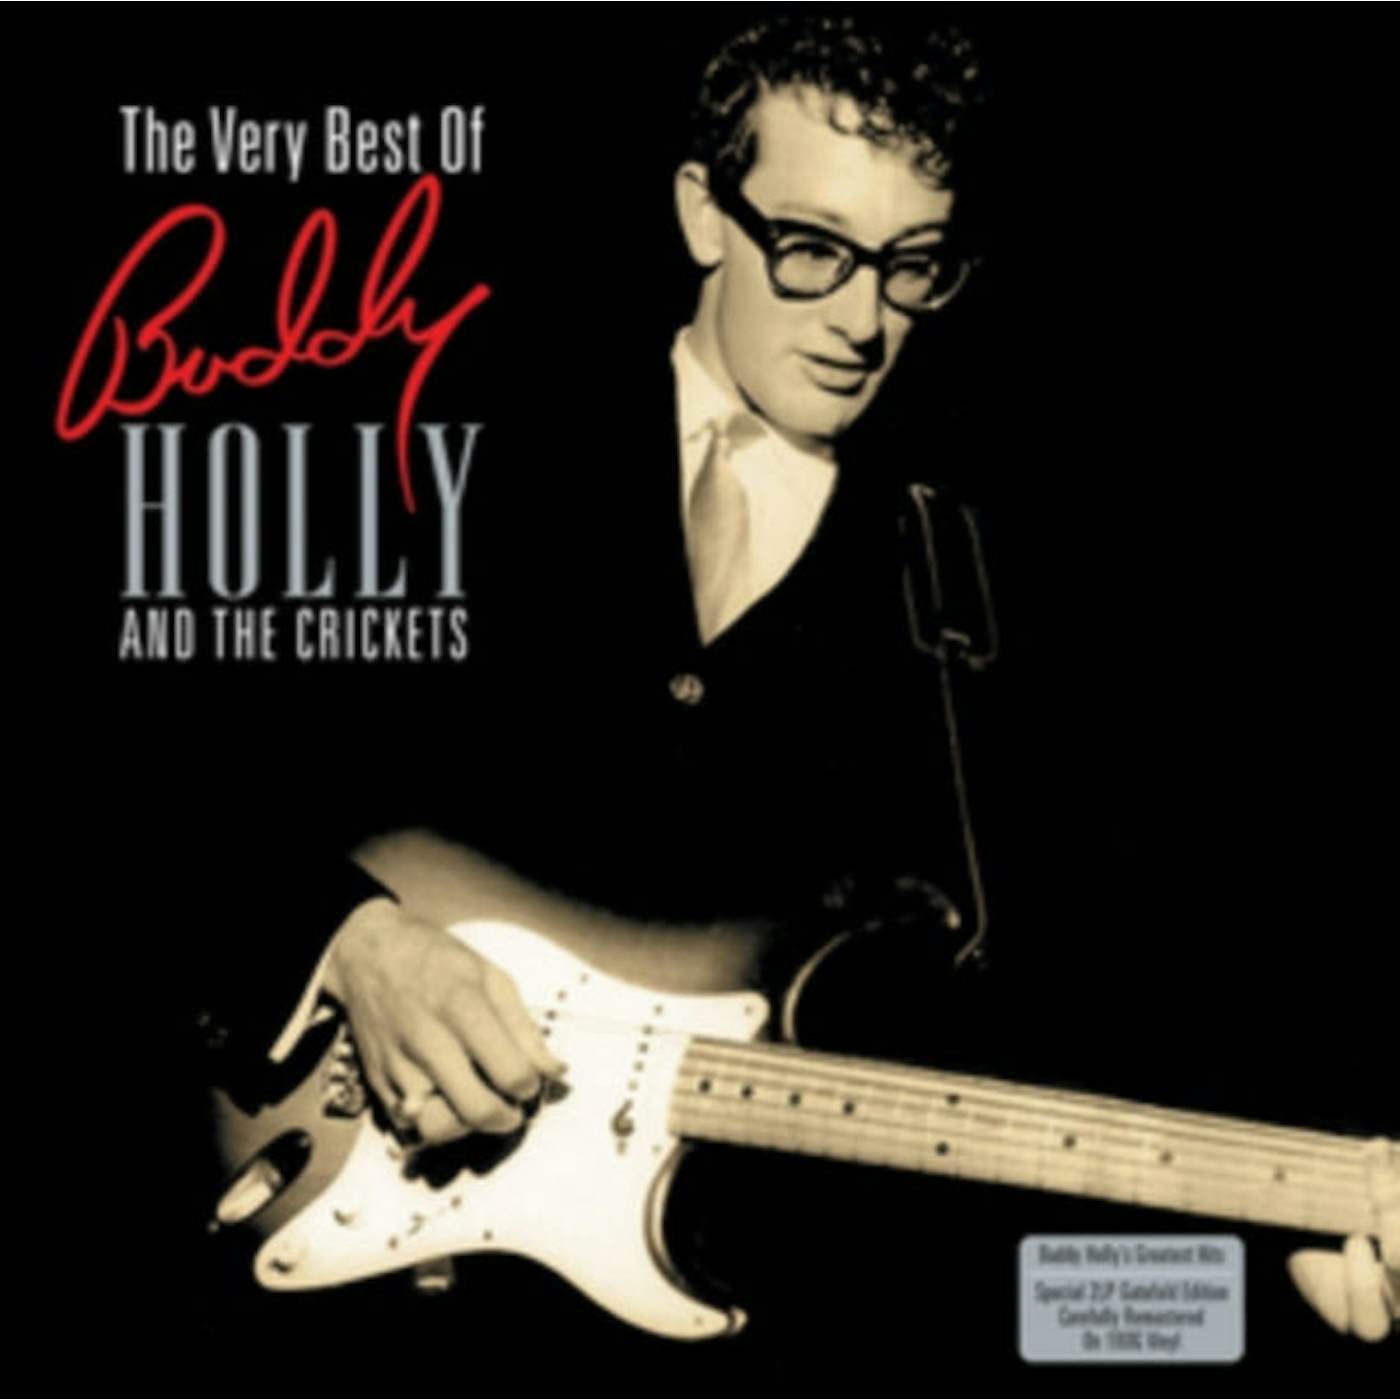 Buddy Holly & The Crickets LP - The Very Best Of (Vinyl)